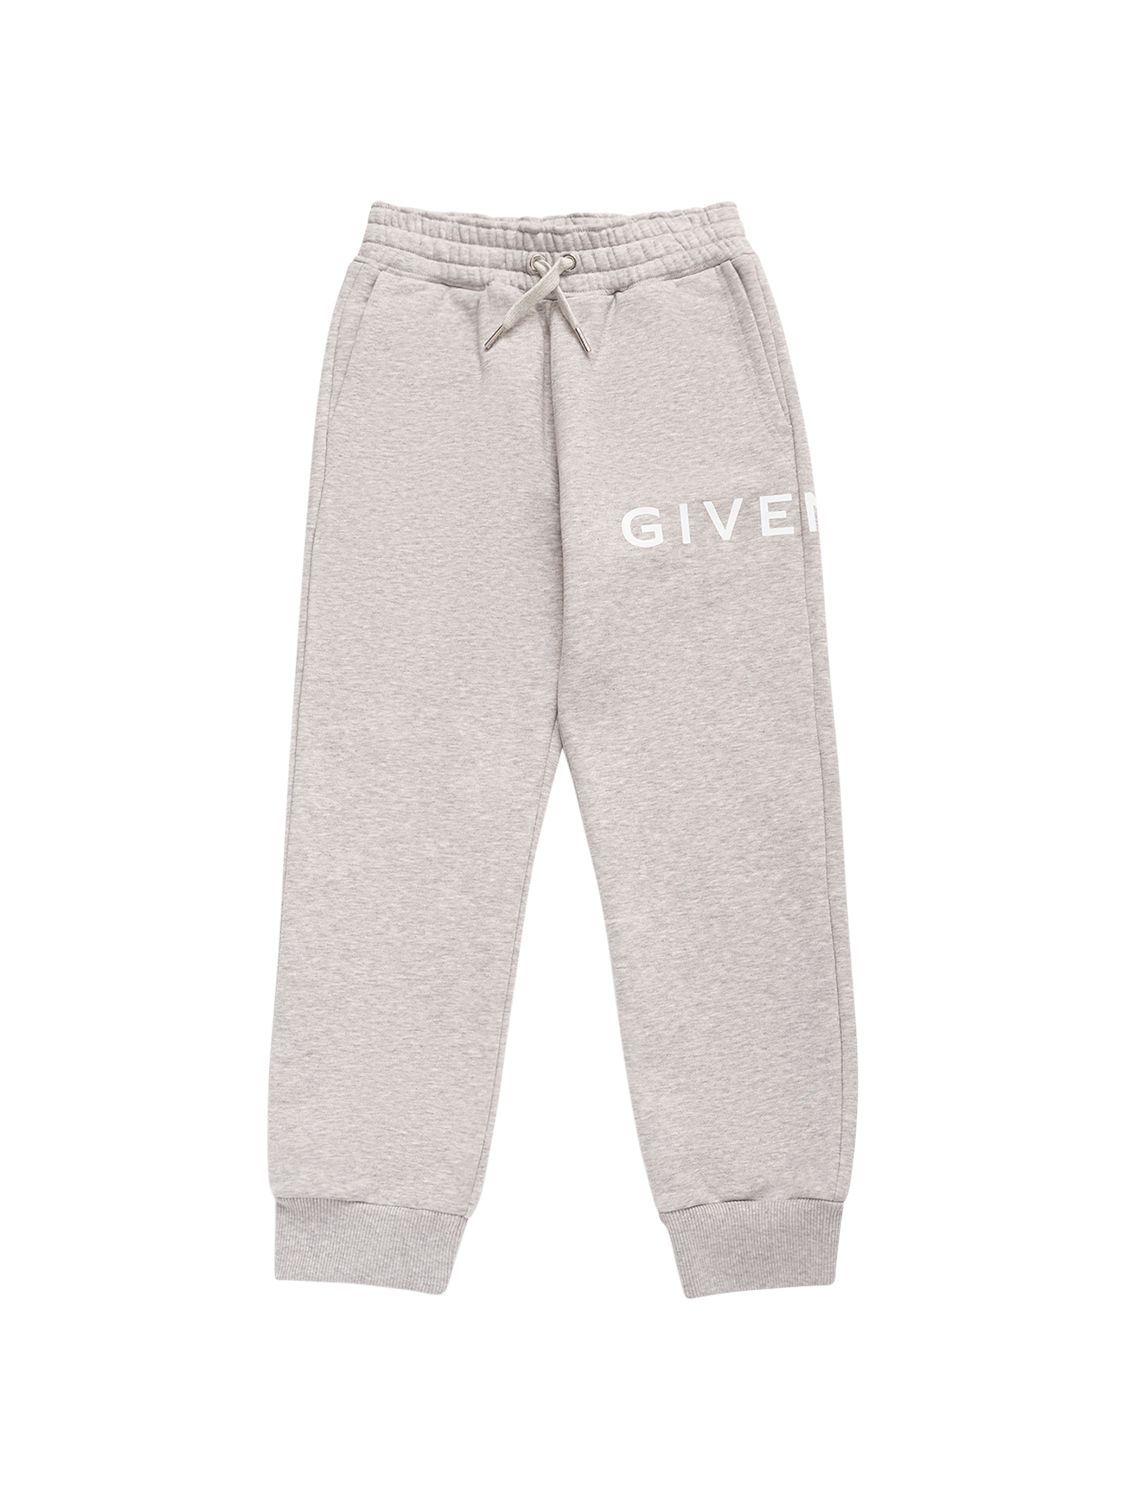 Givenchy Logo Printed Cotton Blend Sweatpants In Grey